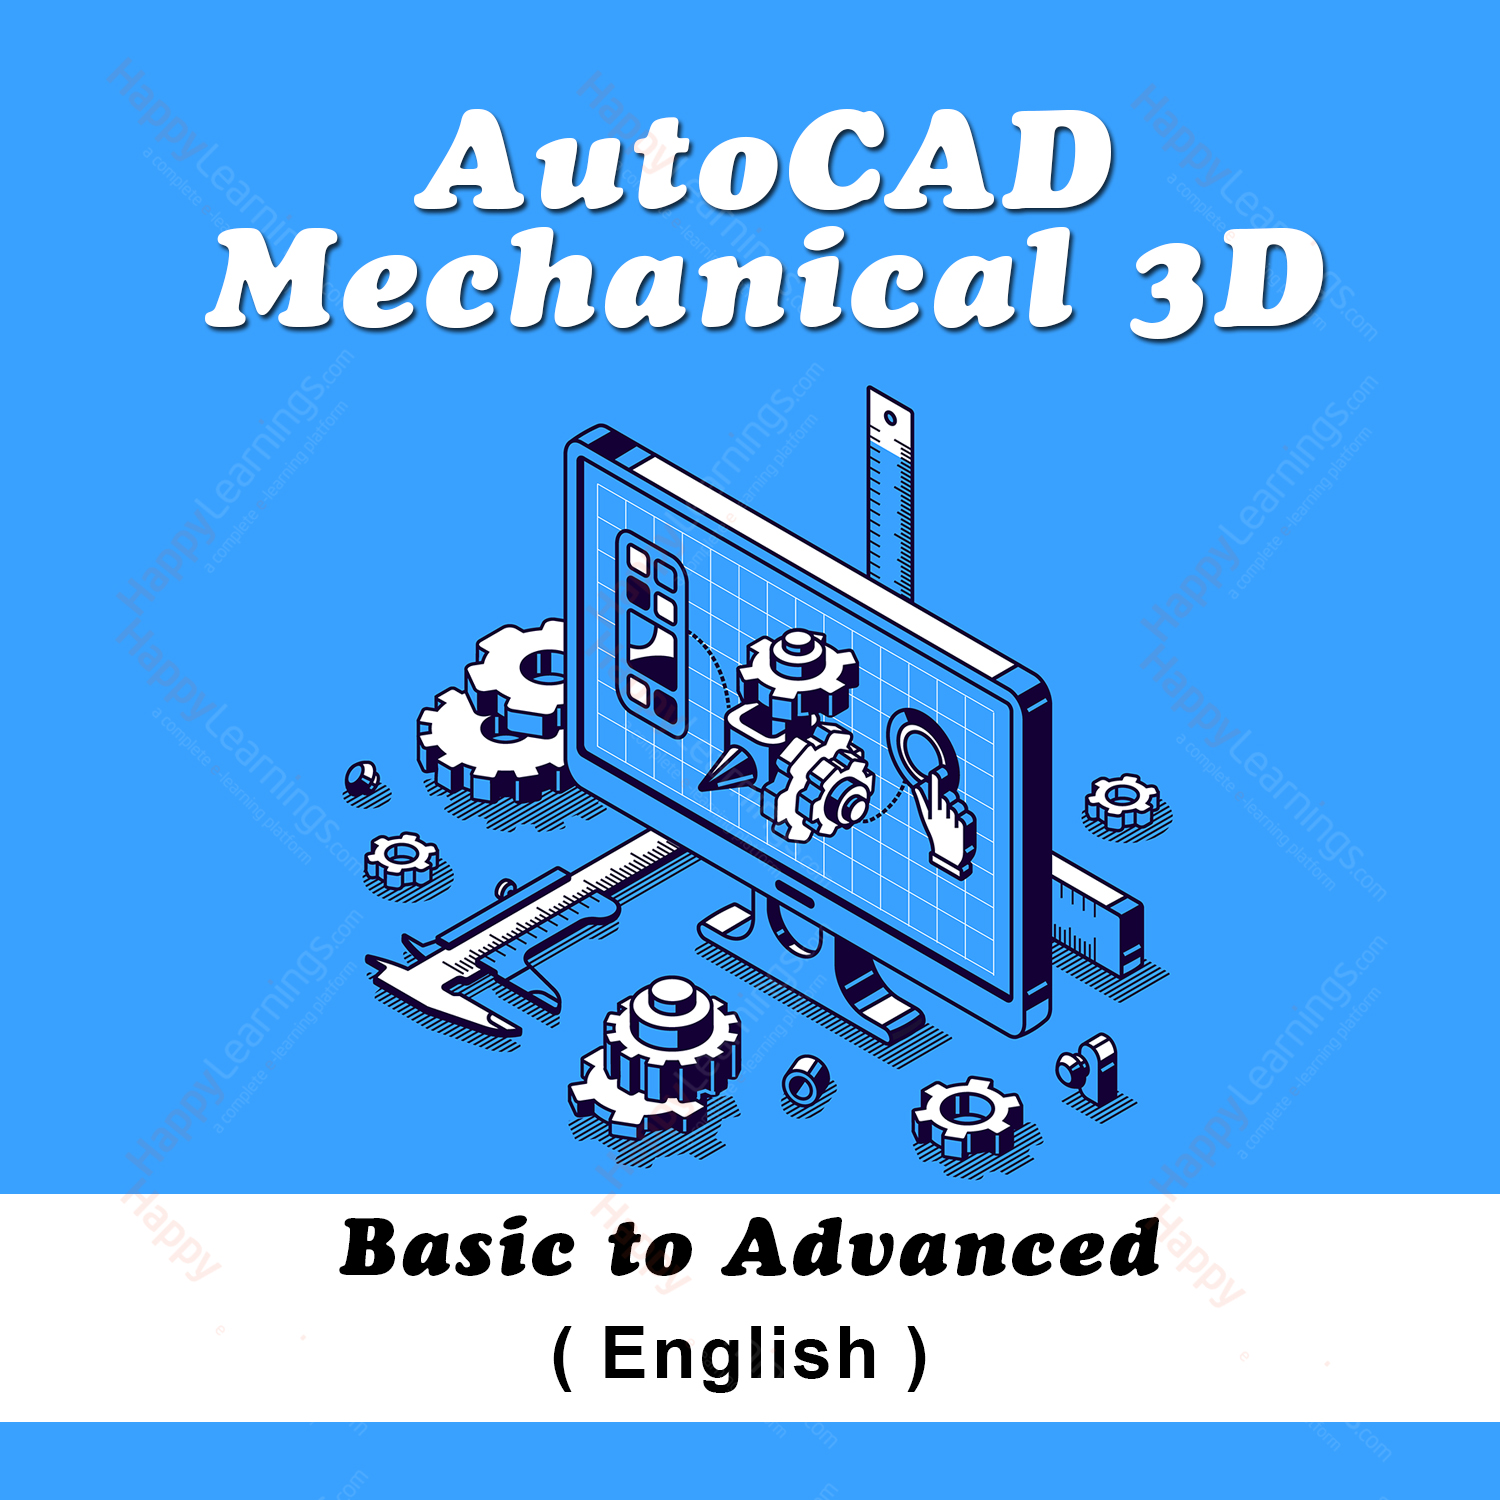 AutoCAD Mechanical 3D in English